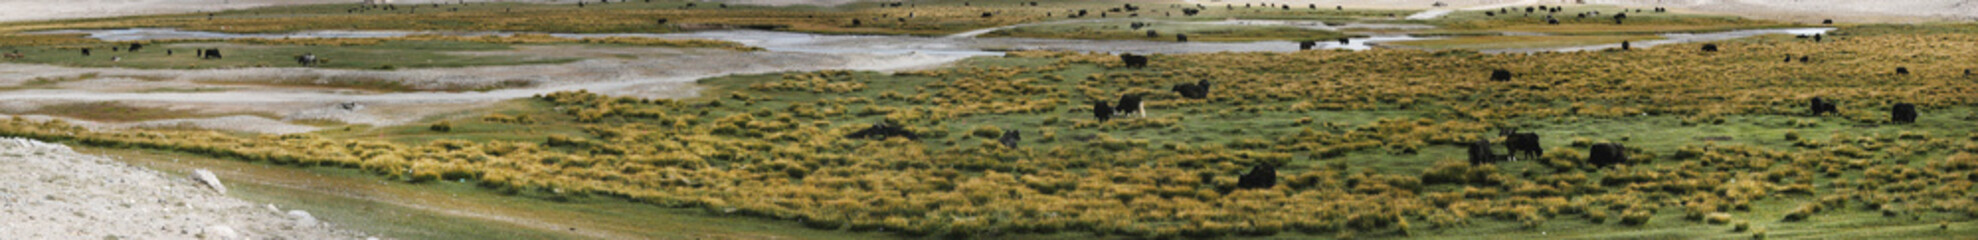 Animals Grazing in the Field